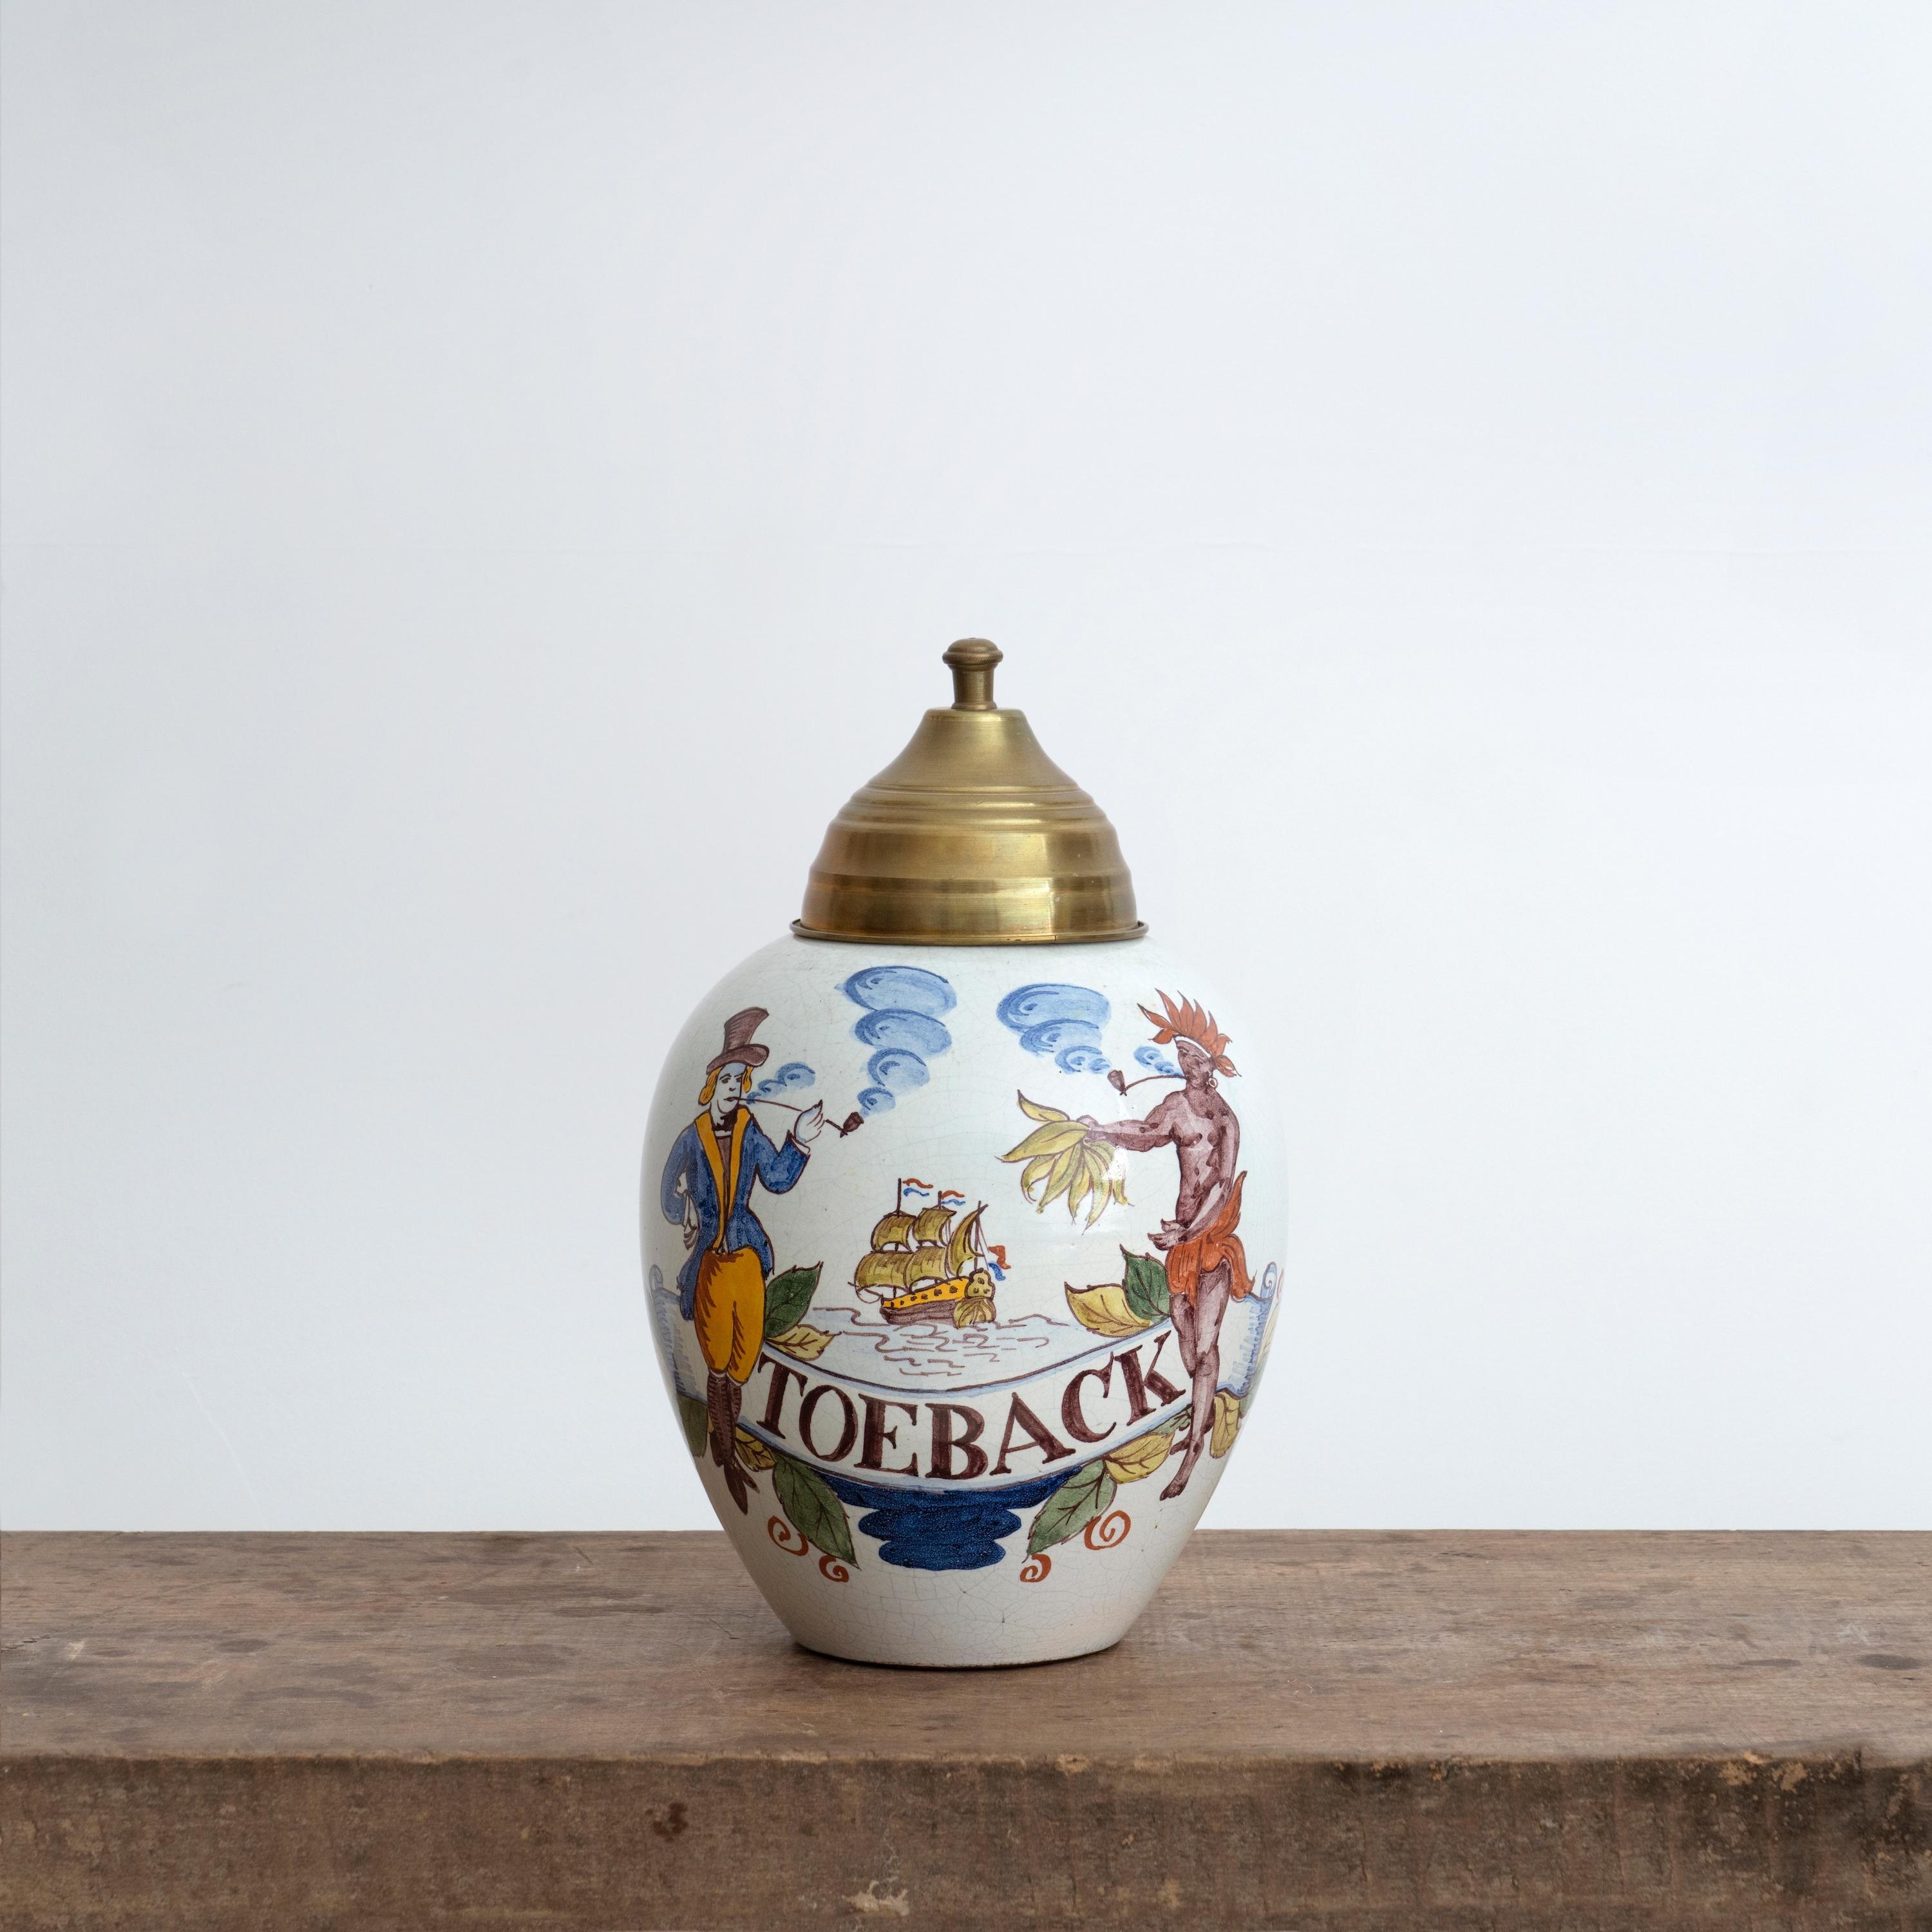 Set of 18th century Dutch ceramic tobacco jars. Crafted in 18th century Delft, these four ceramic tobacco jars are finished with a polychrome glaze and capped with copper lids.